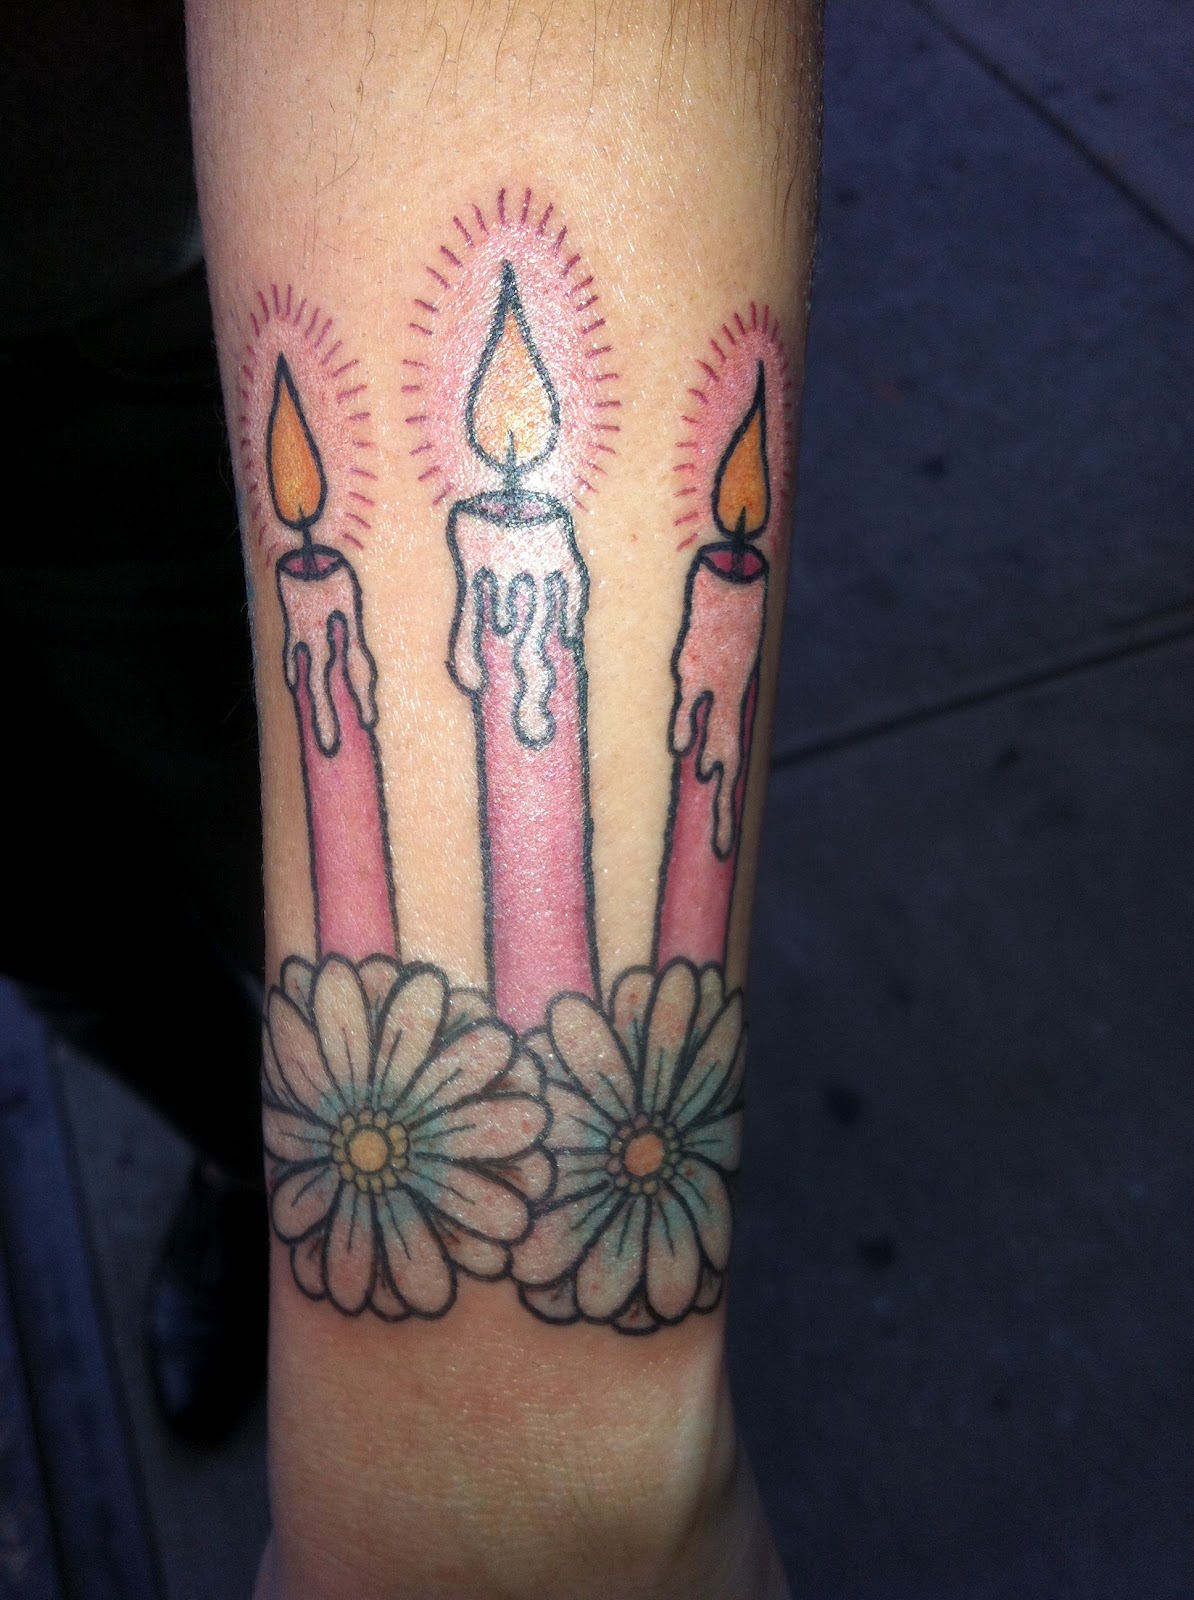 Candle awesome tattoos